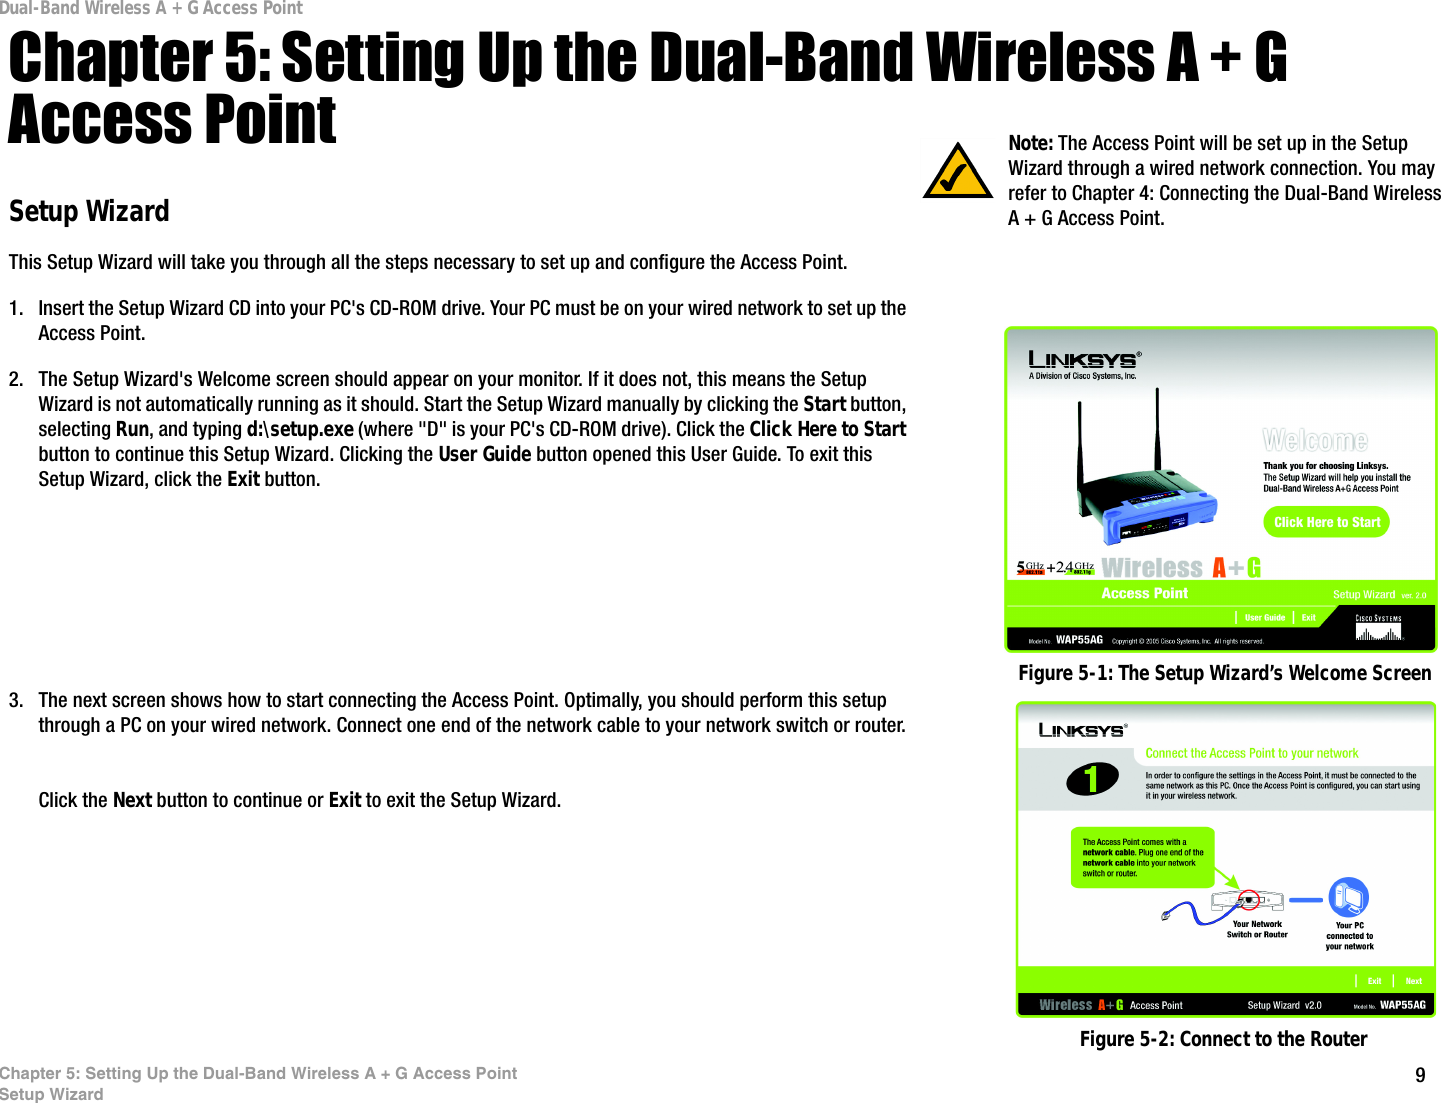 9Chapter 5: Setting Up the Dual-Band Wireless A + G Access PointSetup WizardDual-Band Wireless A + G Access PointChapter 5: Setting Up the Dual-Band Wireless A + G Access PointSetup WizardThis Setup Wizard will take you through all the steps necessary to set up and configure the Access Point.1. Insert the Setup Wizard CD into your PC&apos;s CD-ROM drive. Your PC must be on your wired network to set up the Access Point.2. The Setup Wizard&apos;s Welcome screen should appear on your monitor. If it does not, this means the Setup Wizard is not automatically running as it should. Start the Setup Wizard manually by clicking the Start button, selecting Run, and typing d:\setup.exe (where &quot;D&quot; is your PC&apos;s CD-ROM drive). Click the Click Here to Start button to continue this Setup Wizard. Clicking the User Guide button opened this User Guide. To exit this Setup Wizard, click the Exit button.3. The next screen shows how to start connecting the Access Point. Optimally, you should perform this setup through a PC on your wired network. Connect one end of the network cable to your network switch or router.Click the Next button to continue or Exit to exit the Setup Wizard. Figure 5-1: The Setup Wizard’s Welcome ScreenNote: The Access Point will be set up in the Setup Wizard through a wired network connection. You may refer to Chapter 4: Connecting the Dual-Band Wireless A + G Access Point. Figure 5-2: Connect to the Router